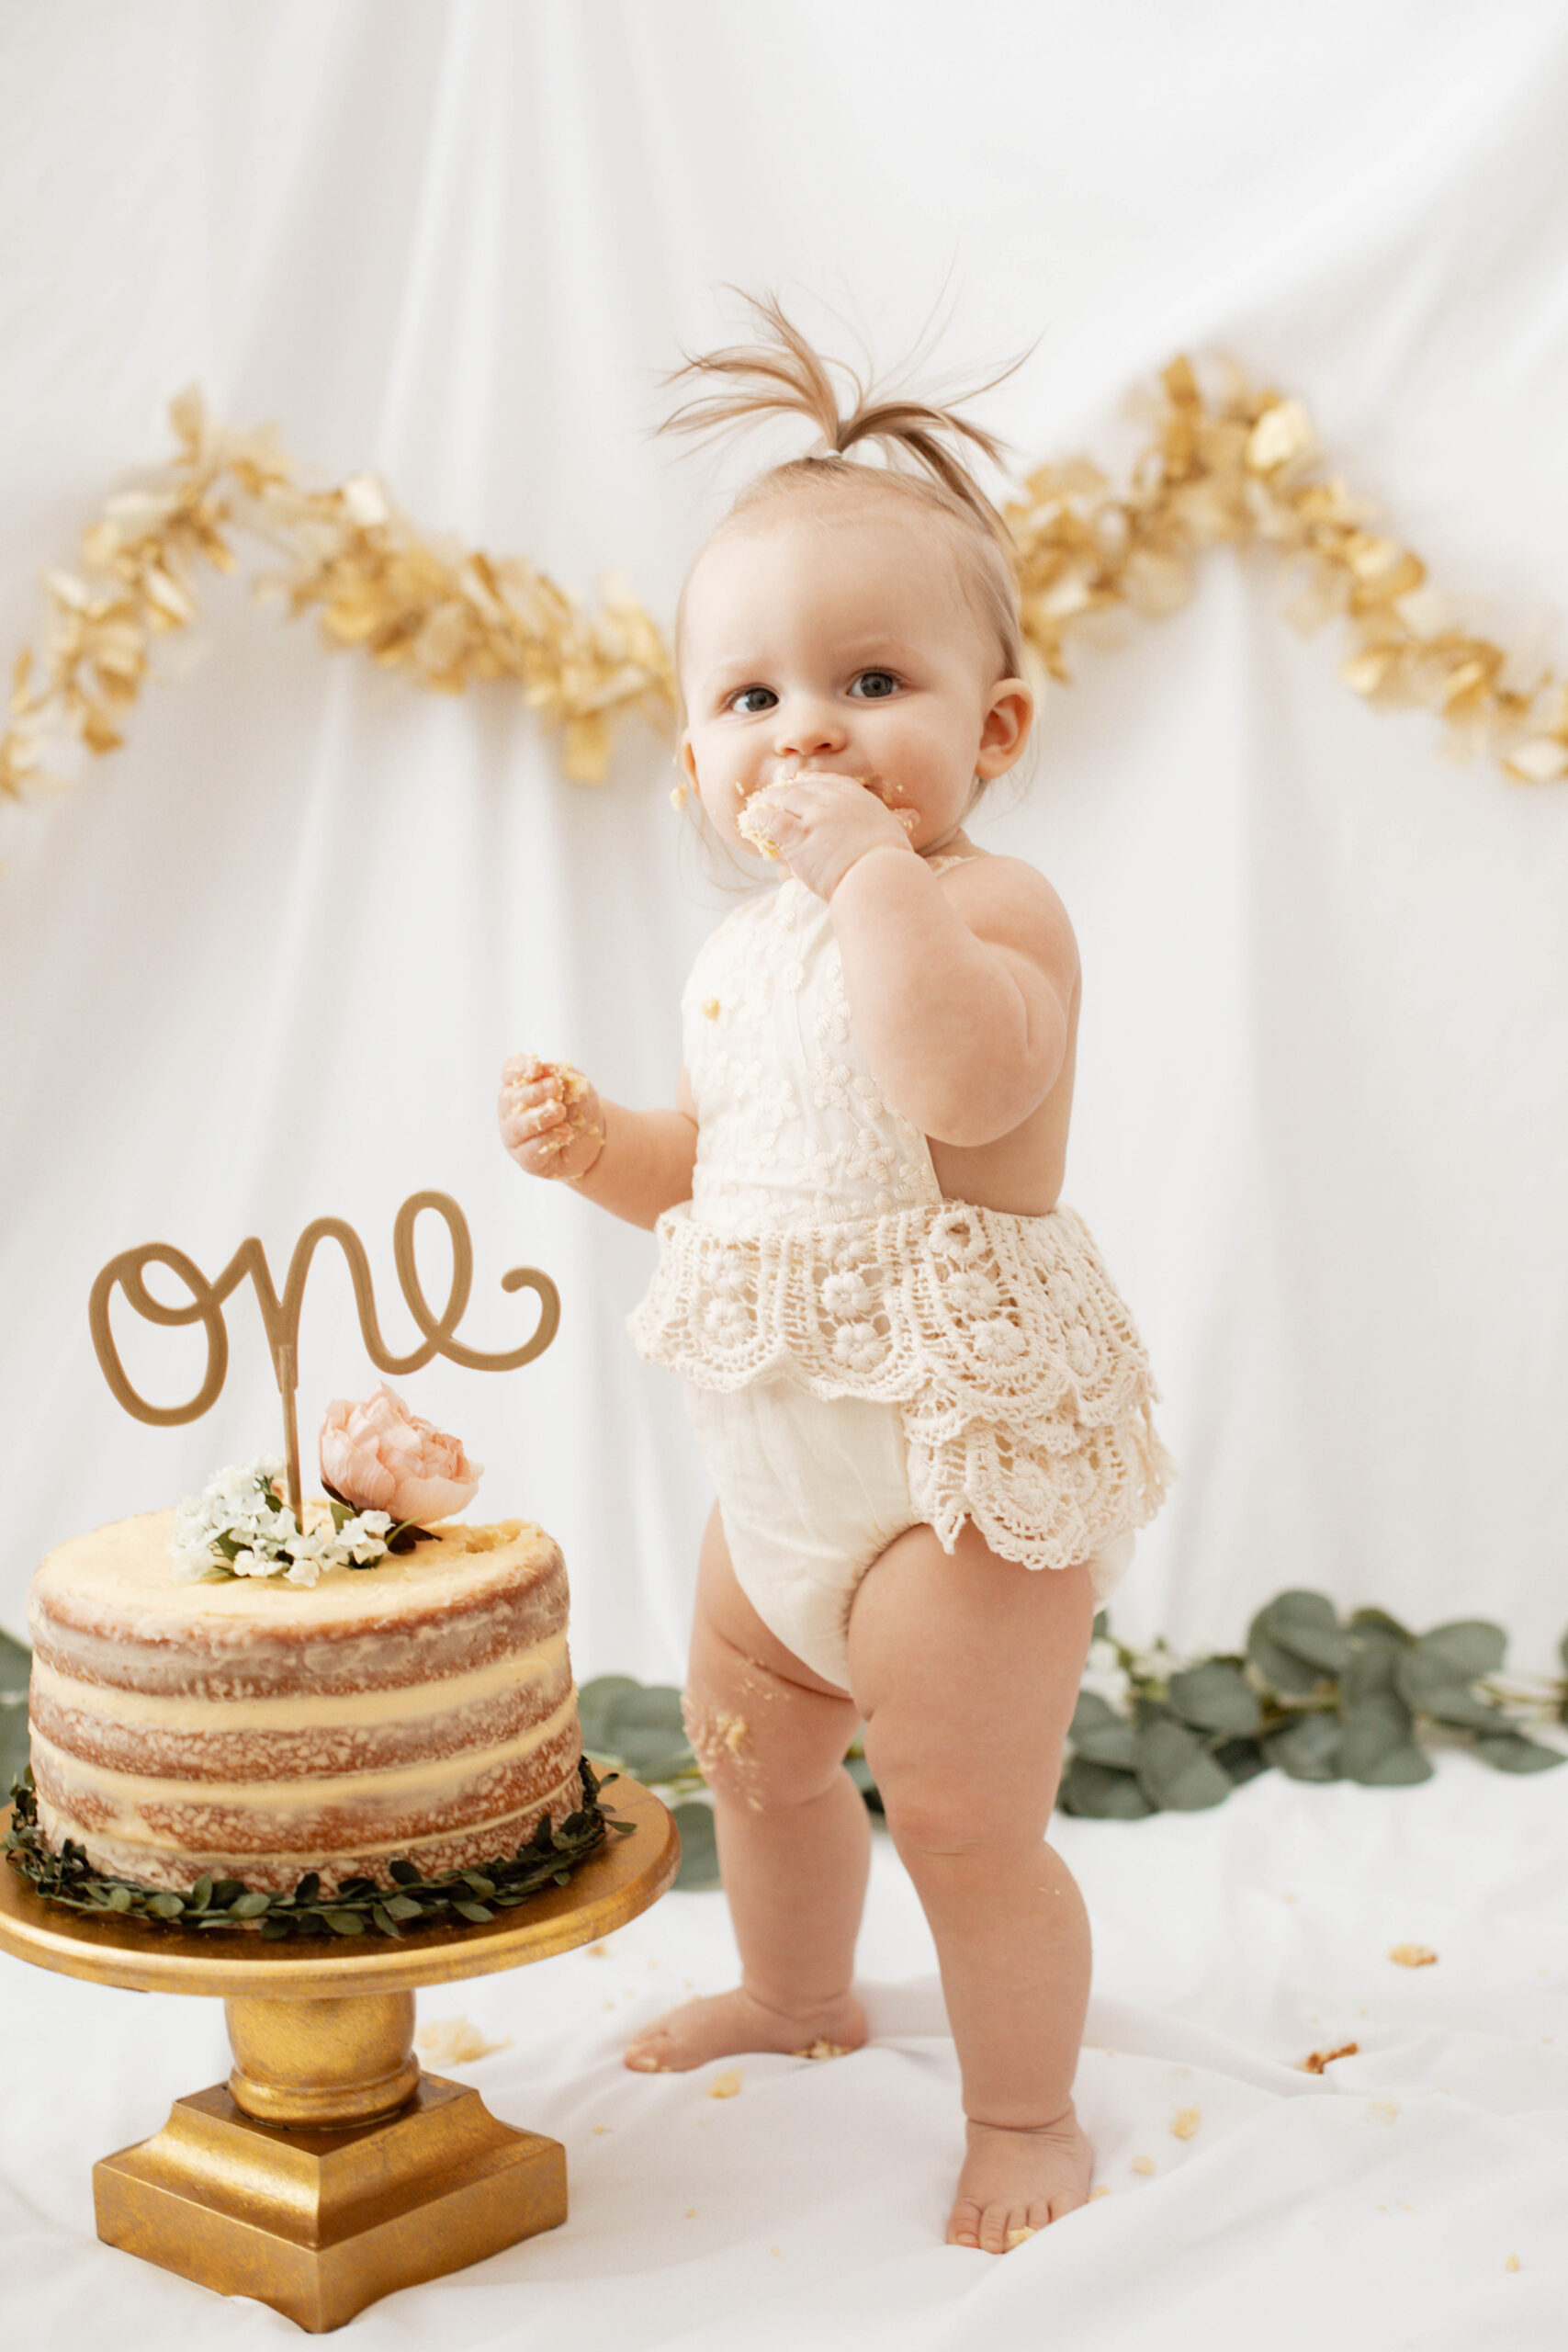 Smash Cake Photography: Tips and Tricks to Get Your Best Shots